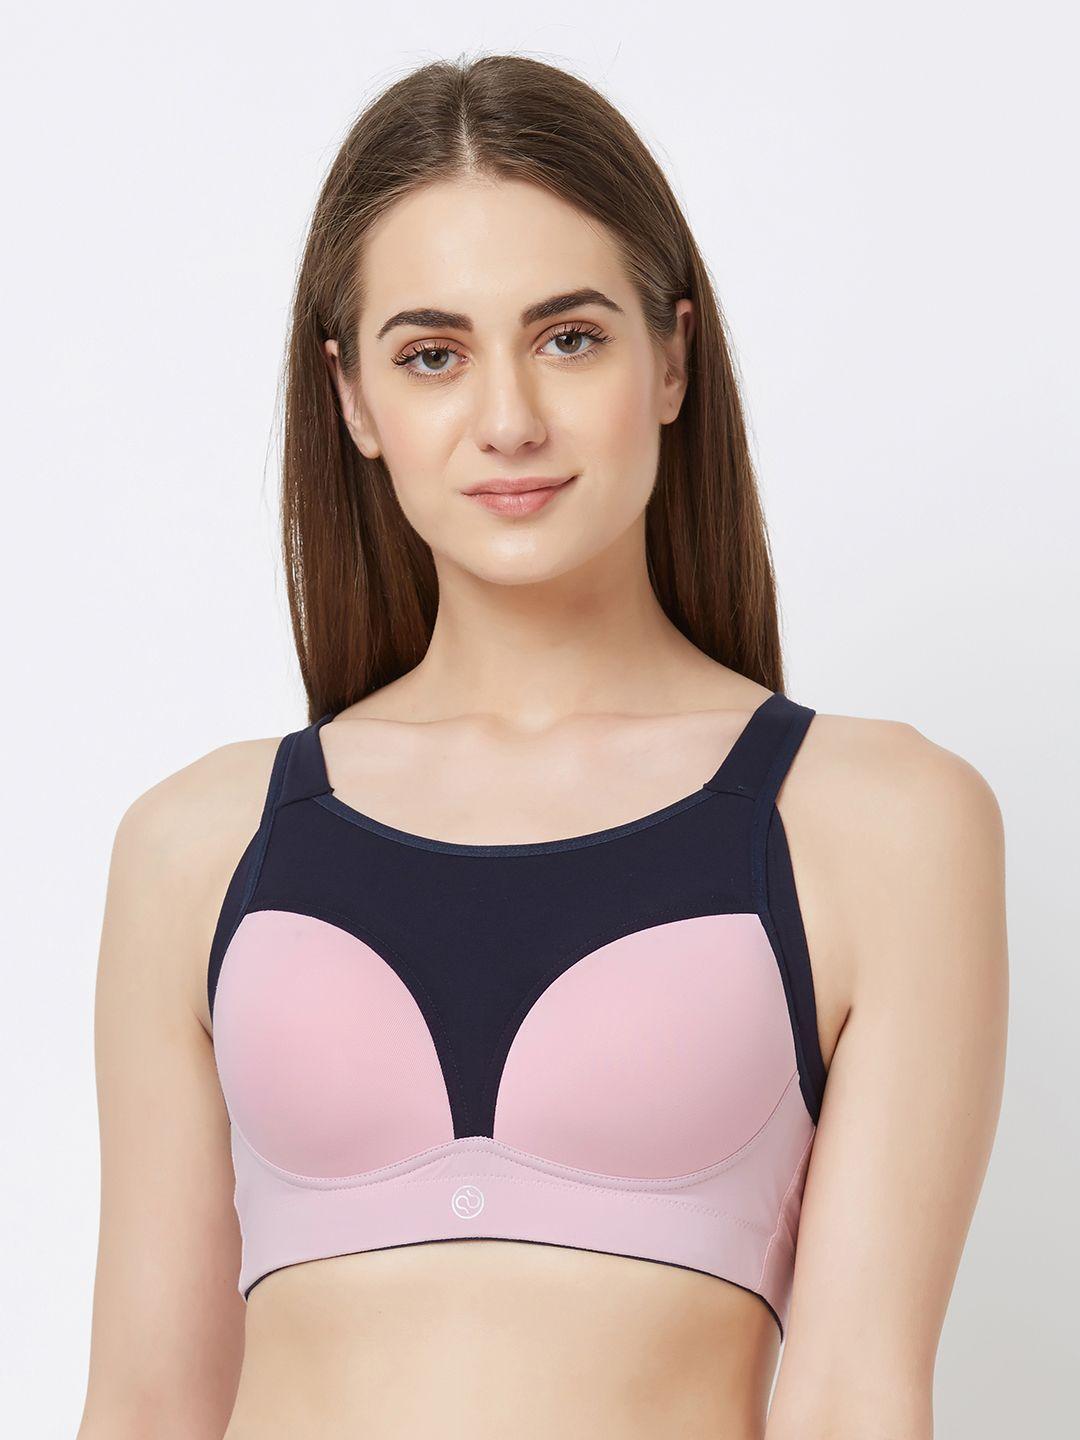 soie pink & blue colourblocked non-wired lightly padded training high impact sports bra